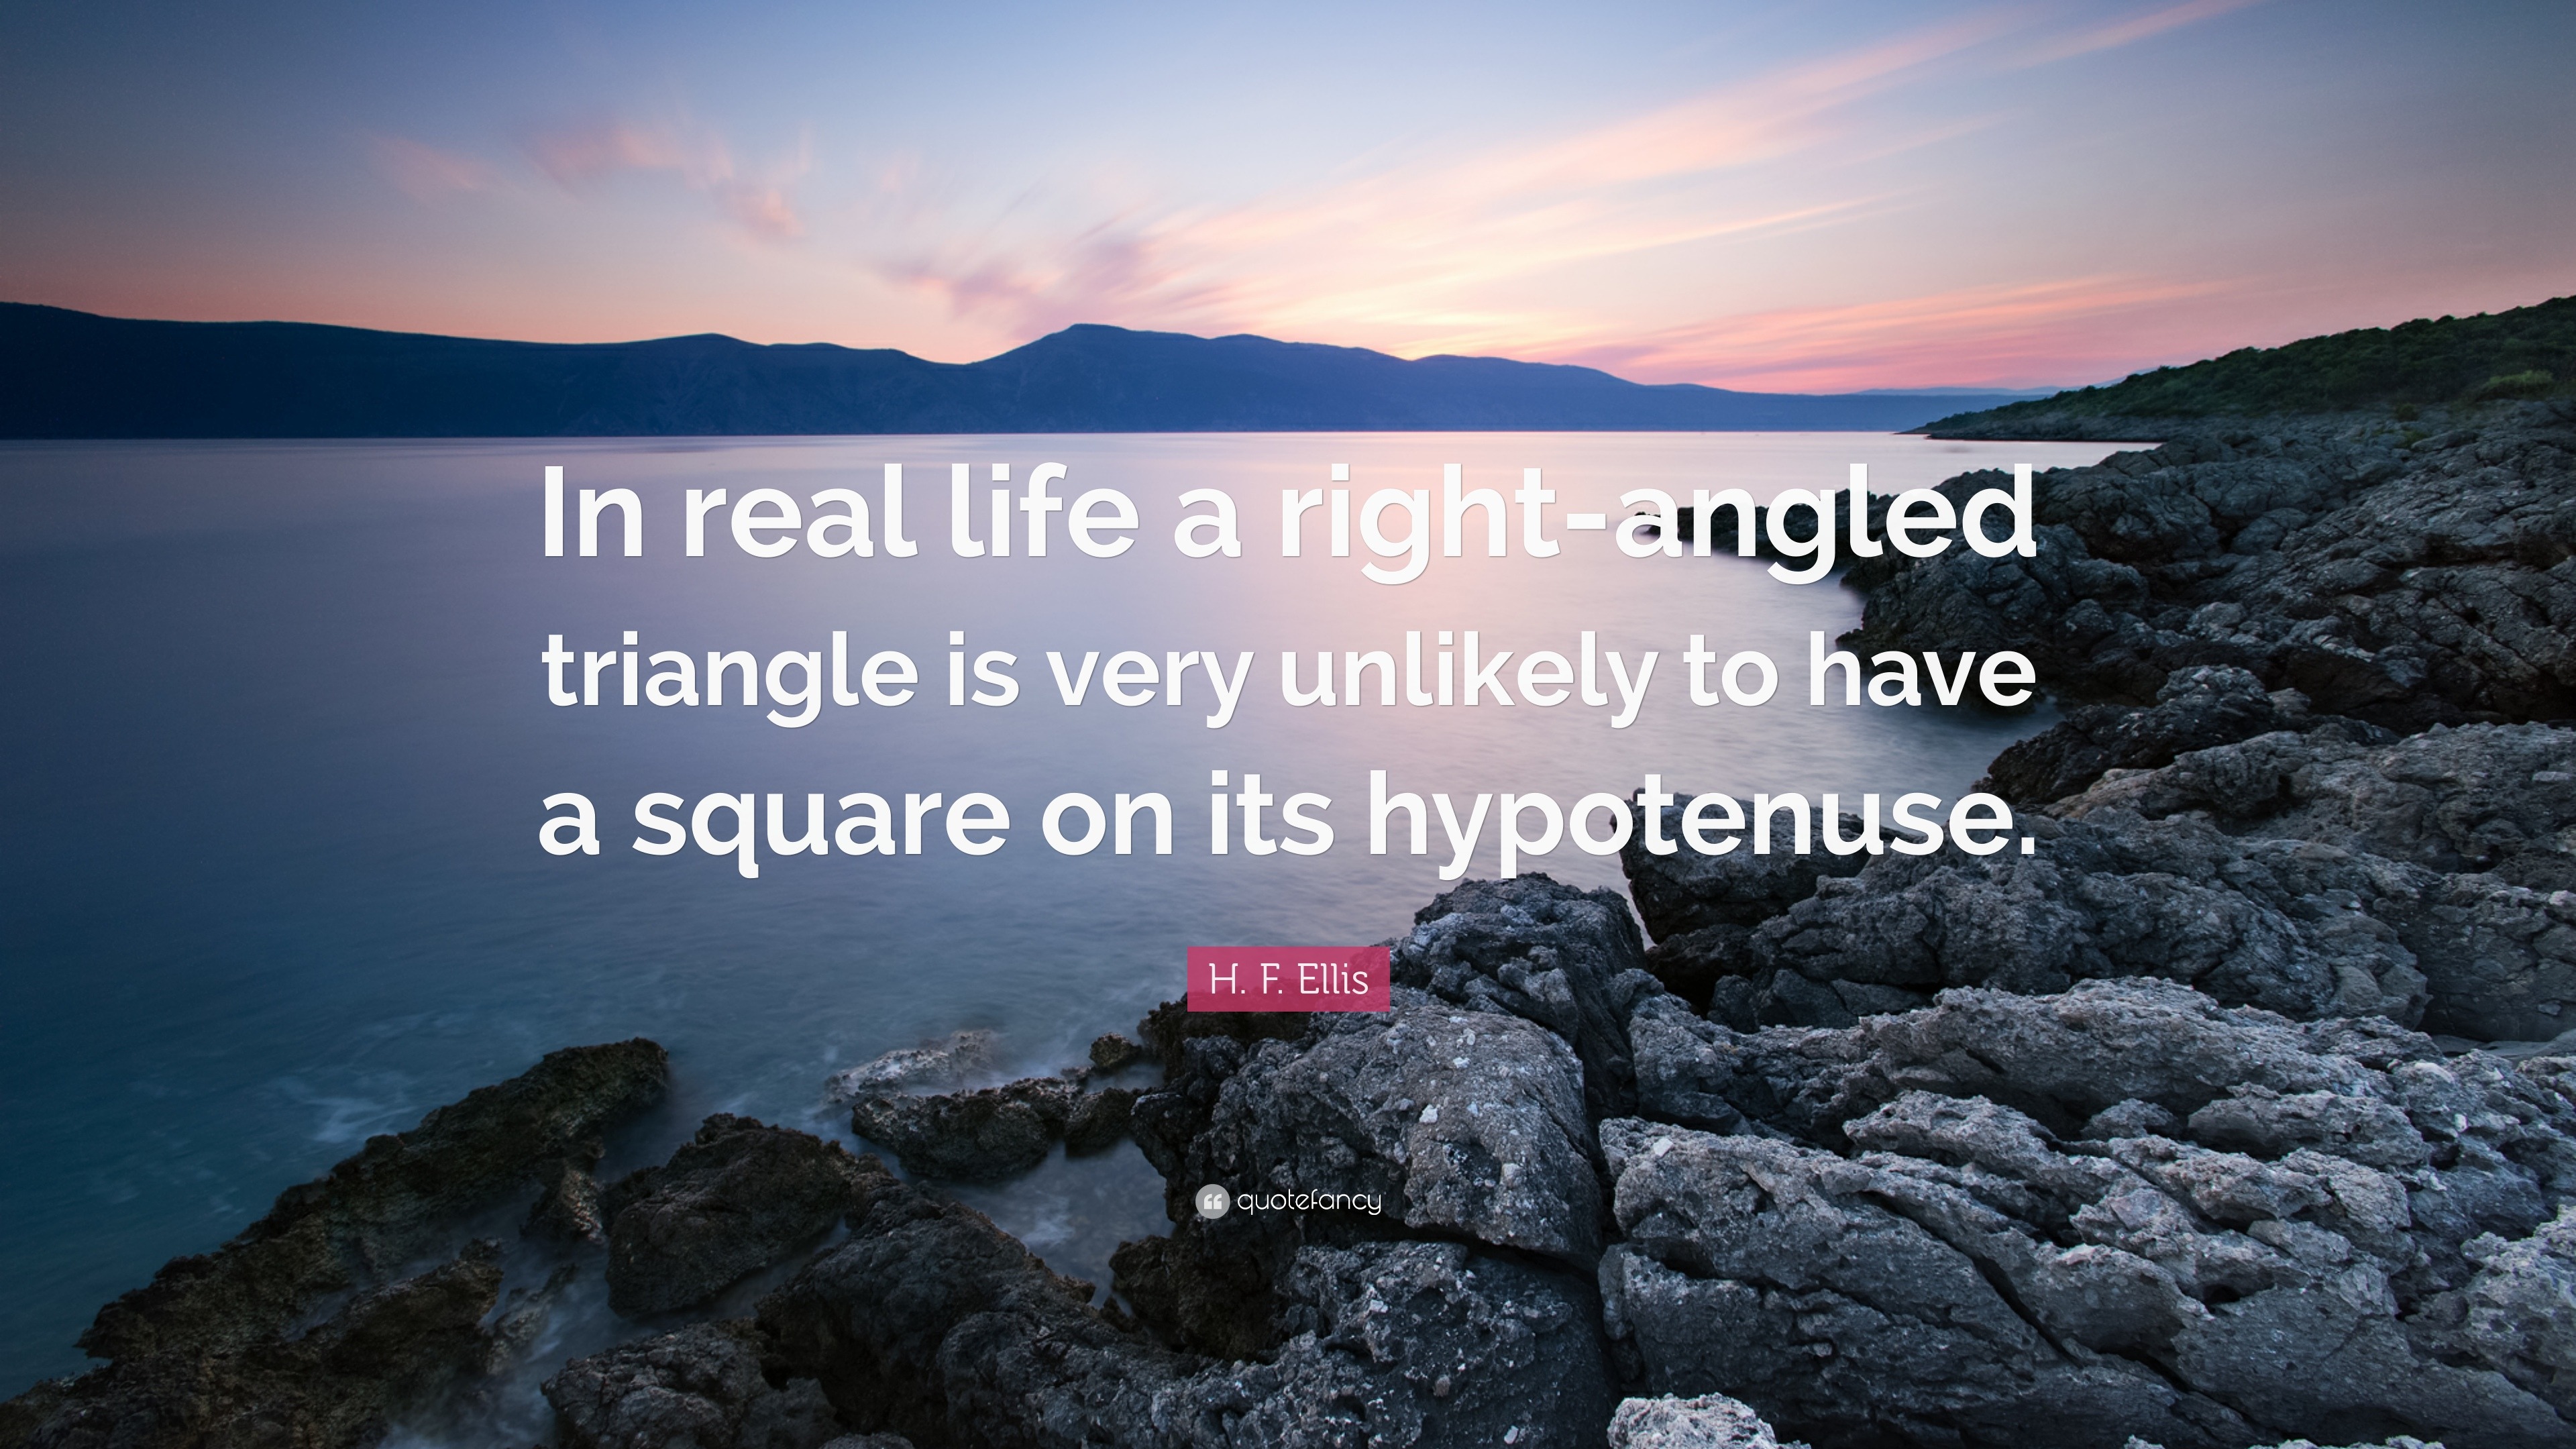 H F Ellis Quote “In real life a right angled triangle is very unlikely